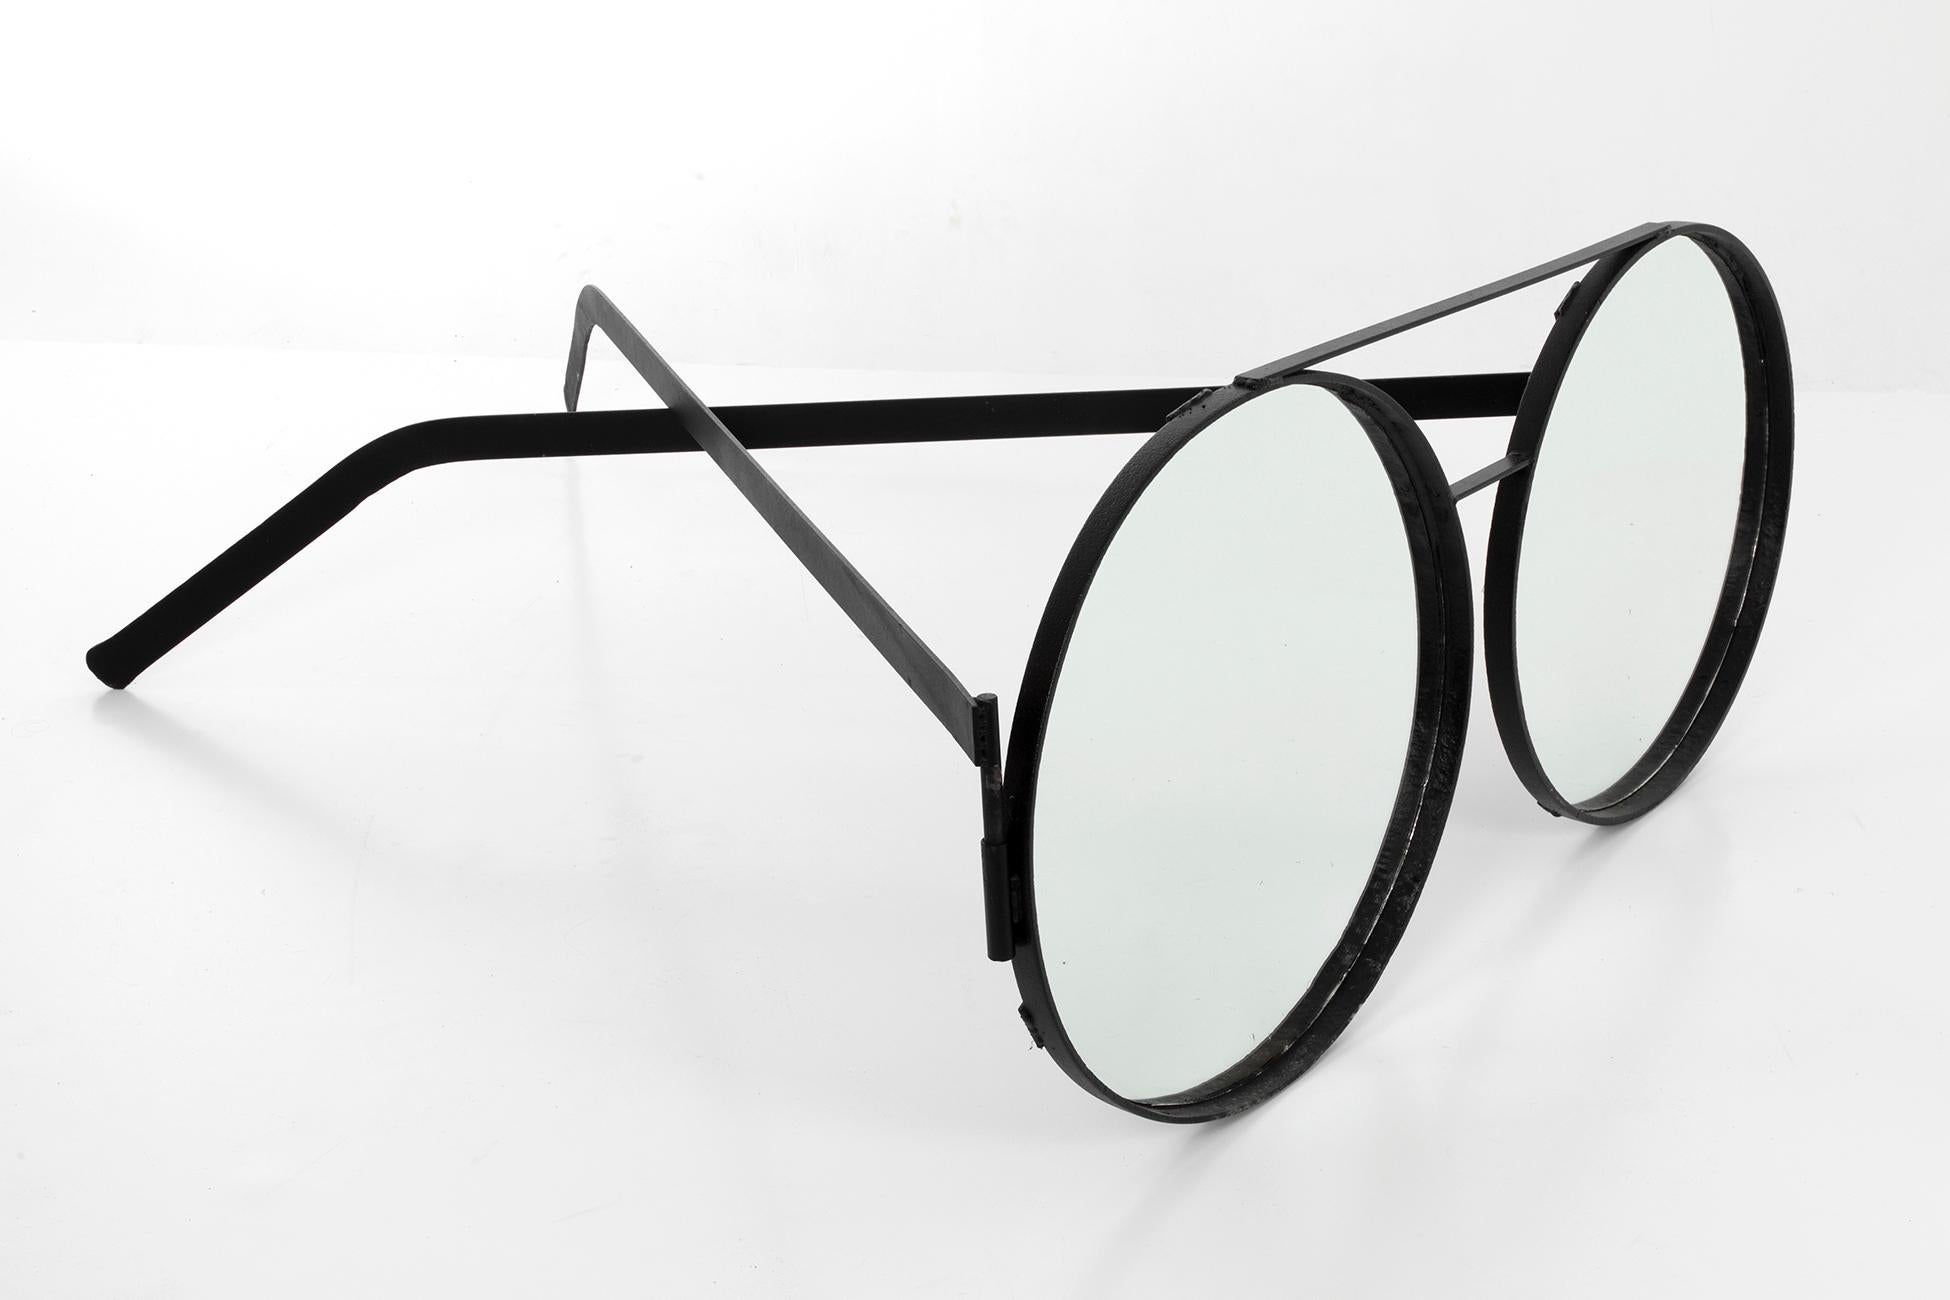 Iron Pair of Handcrafted Oversized Glasses